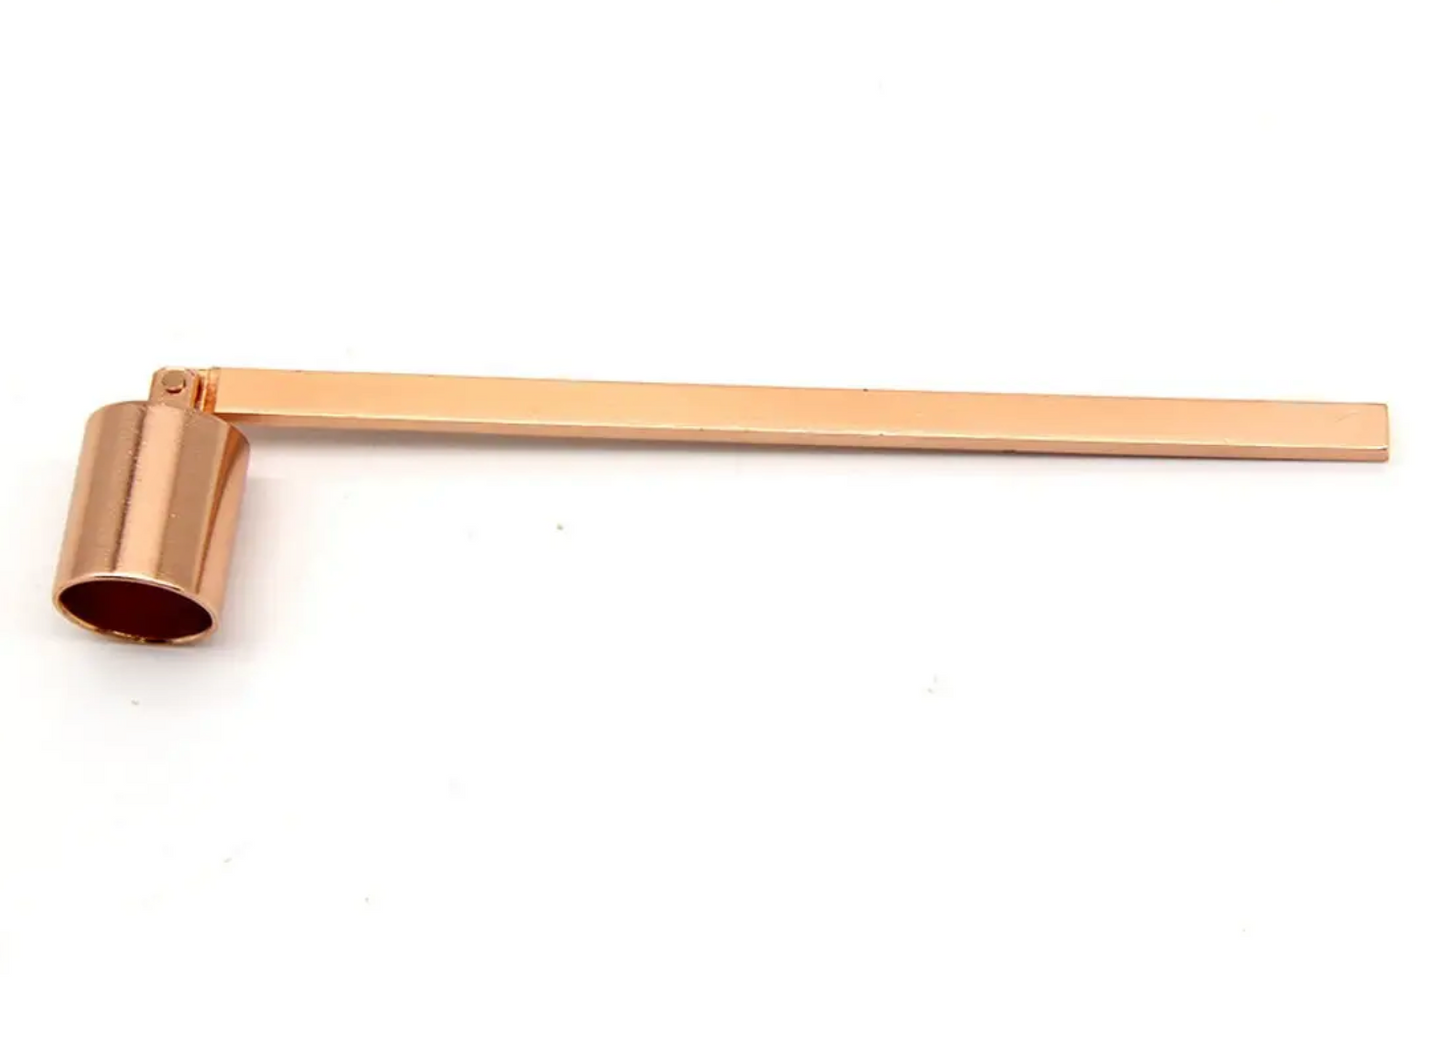 Candle Wick Snuffer